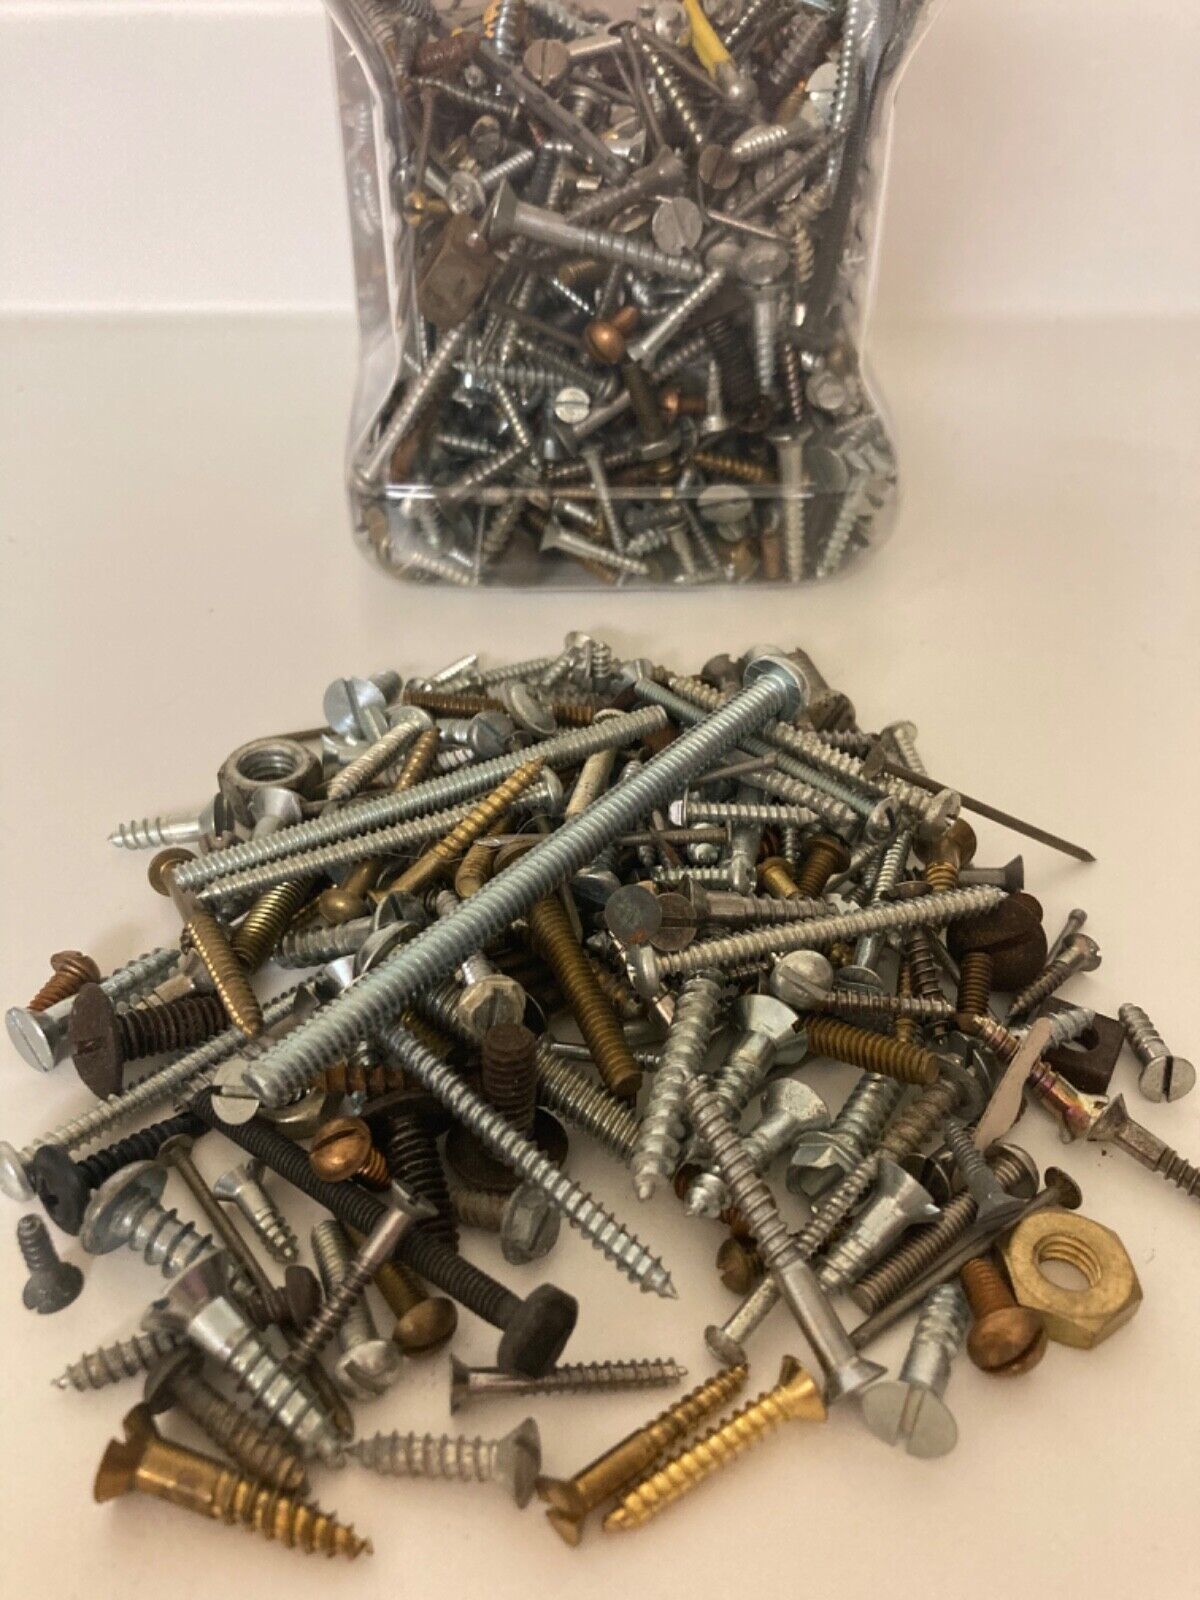 8"-16 x 8" Hex Head Cap Screw Bolts, Stainless Steel 18-8 (Quantity: 100 pcs) Fully Threaded, Coarse Thread, Thread Size: Inch, Bolt Length: - 3